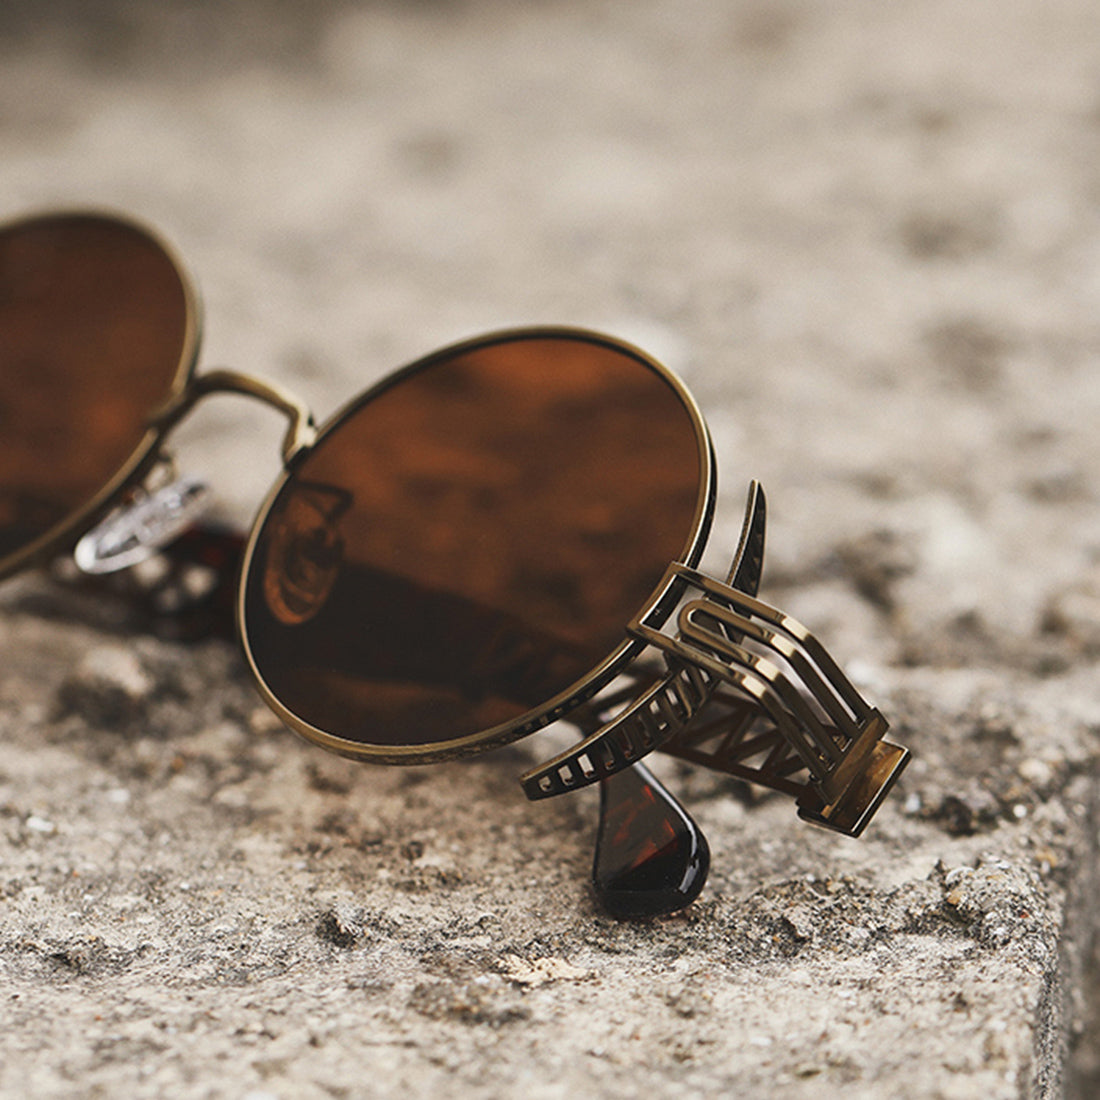 The Rebellion Road Sunglasses, with their vintage retro design, are seen laying on the ground.